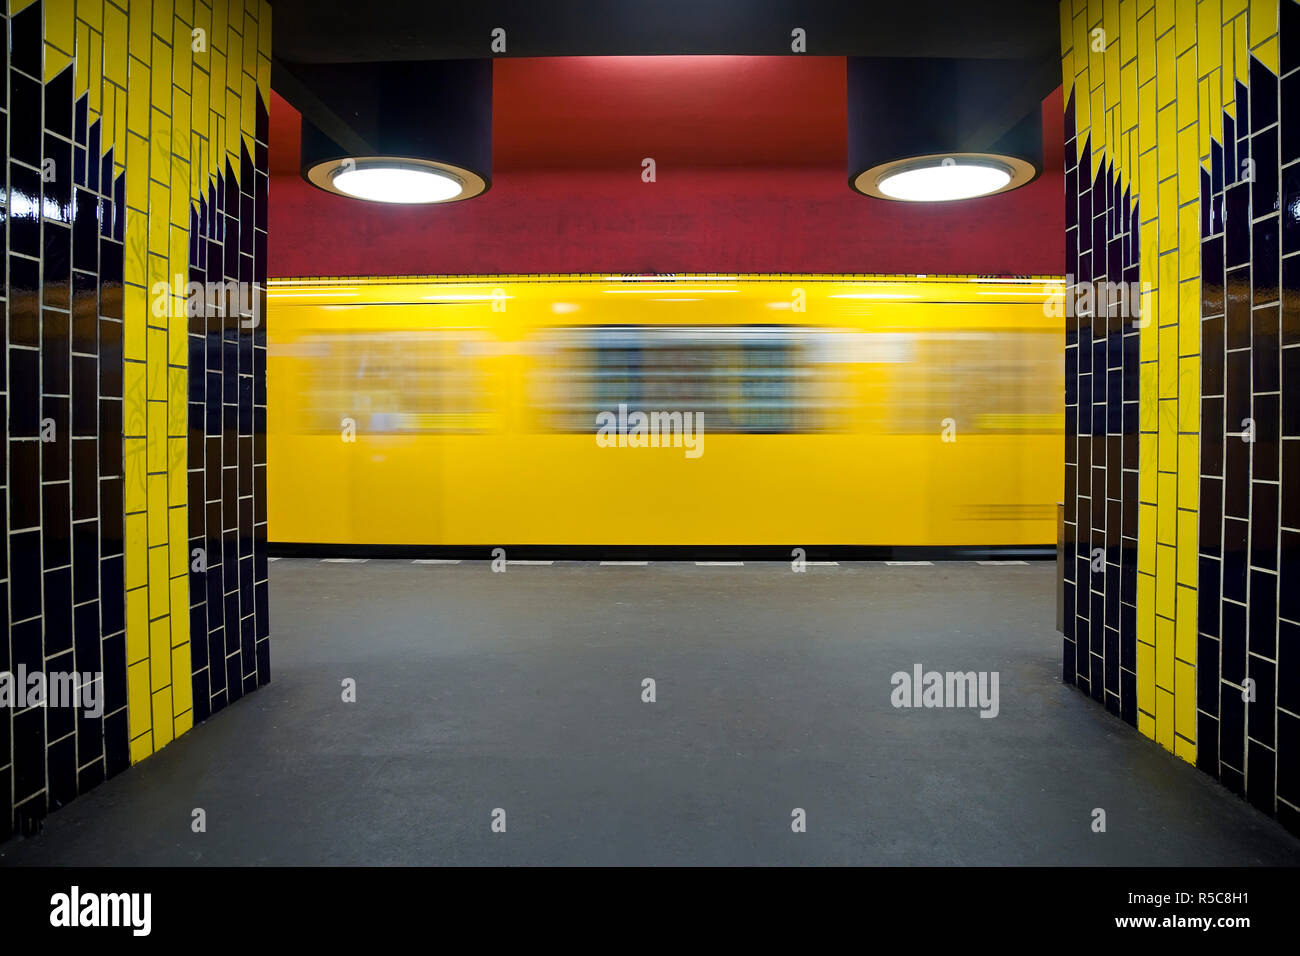 Germany, Berlin, modern subway station, moving train pulling into the station Stock Photo